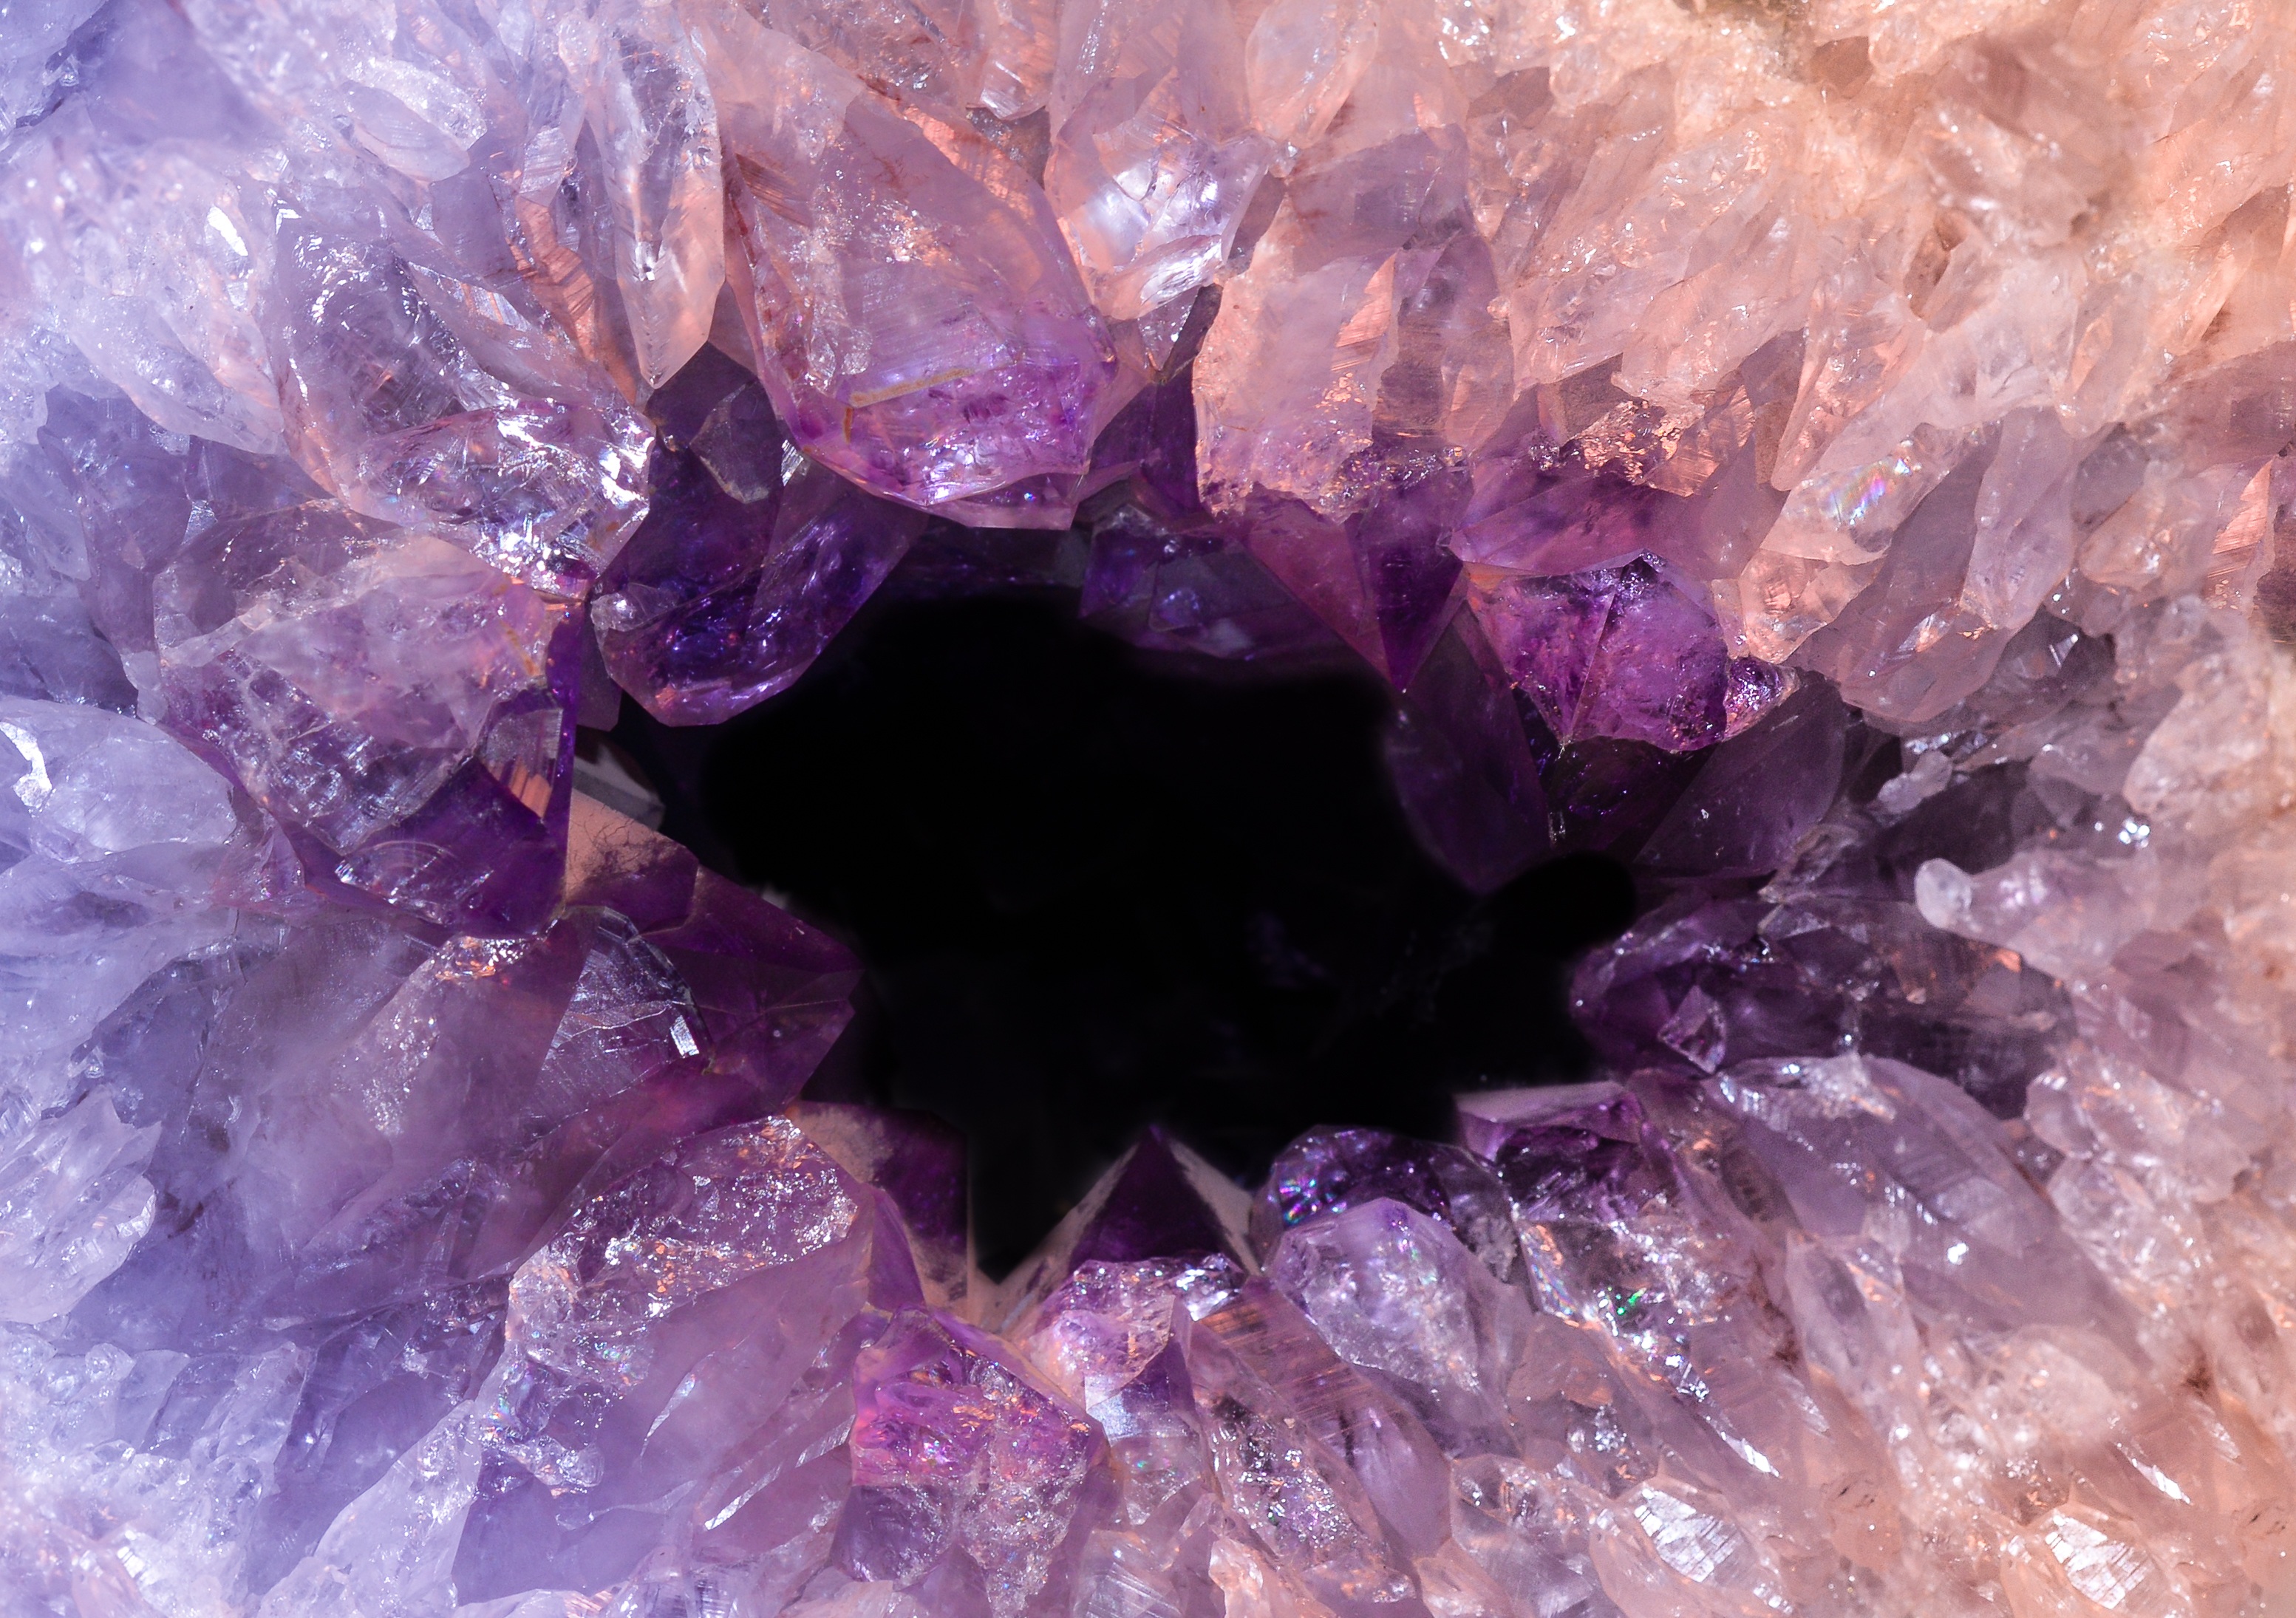 Amethyst is a violet variety of quartz often used in jewelry. by Skitterphoto